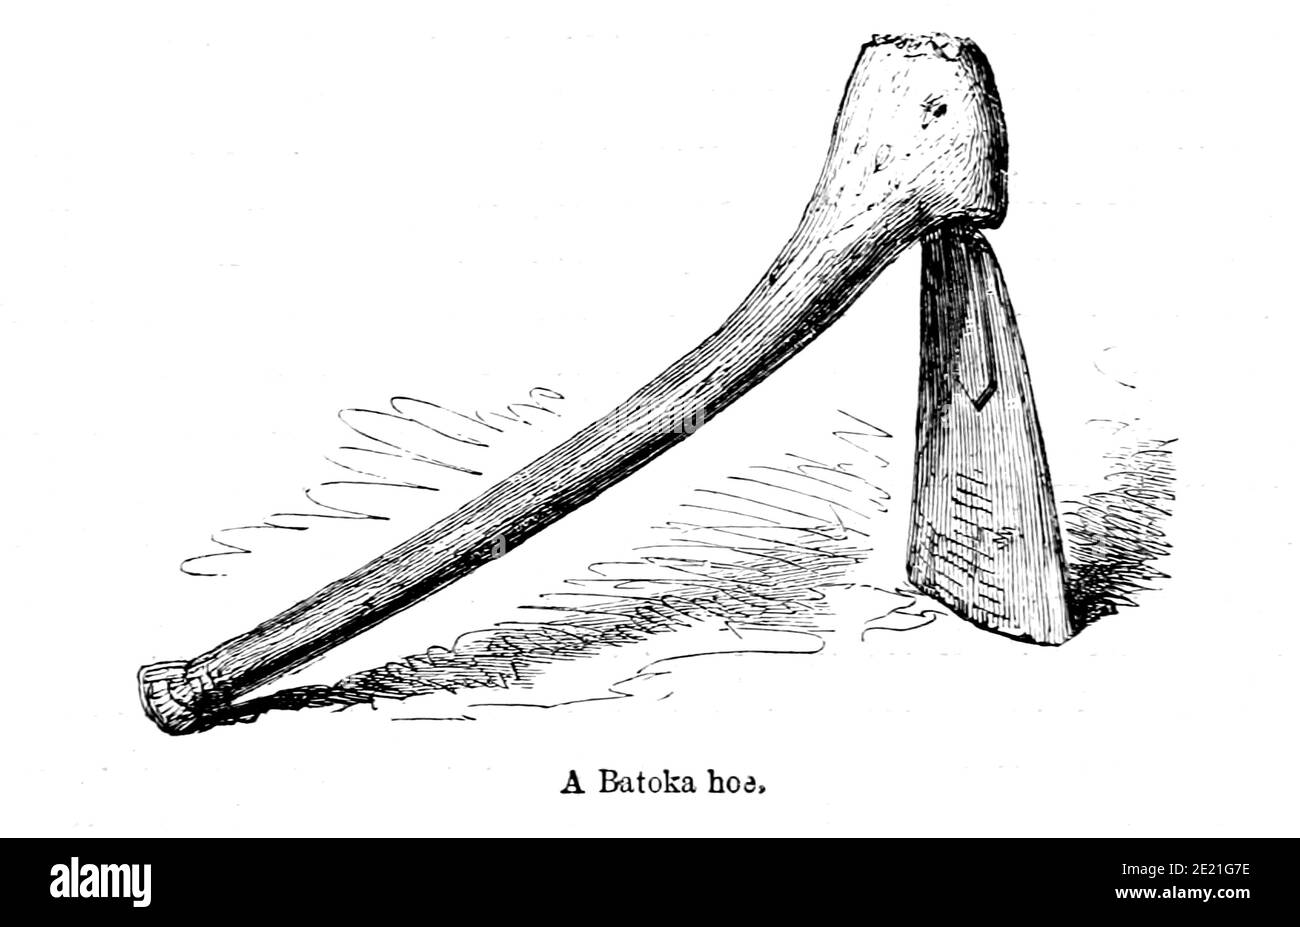 Batoka Hoe From the book ' Missionary travels and researches in South Africa ' by Livingstone, David, 1813-1873; Arnot, Fred. S. (Frederick Stanley), 1858-1914; Published in London by J. Murray in 1899 Stock Photo